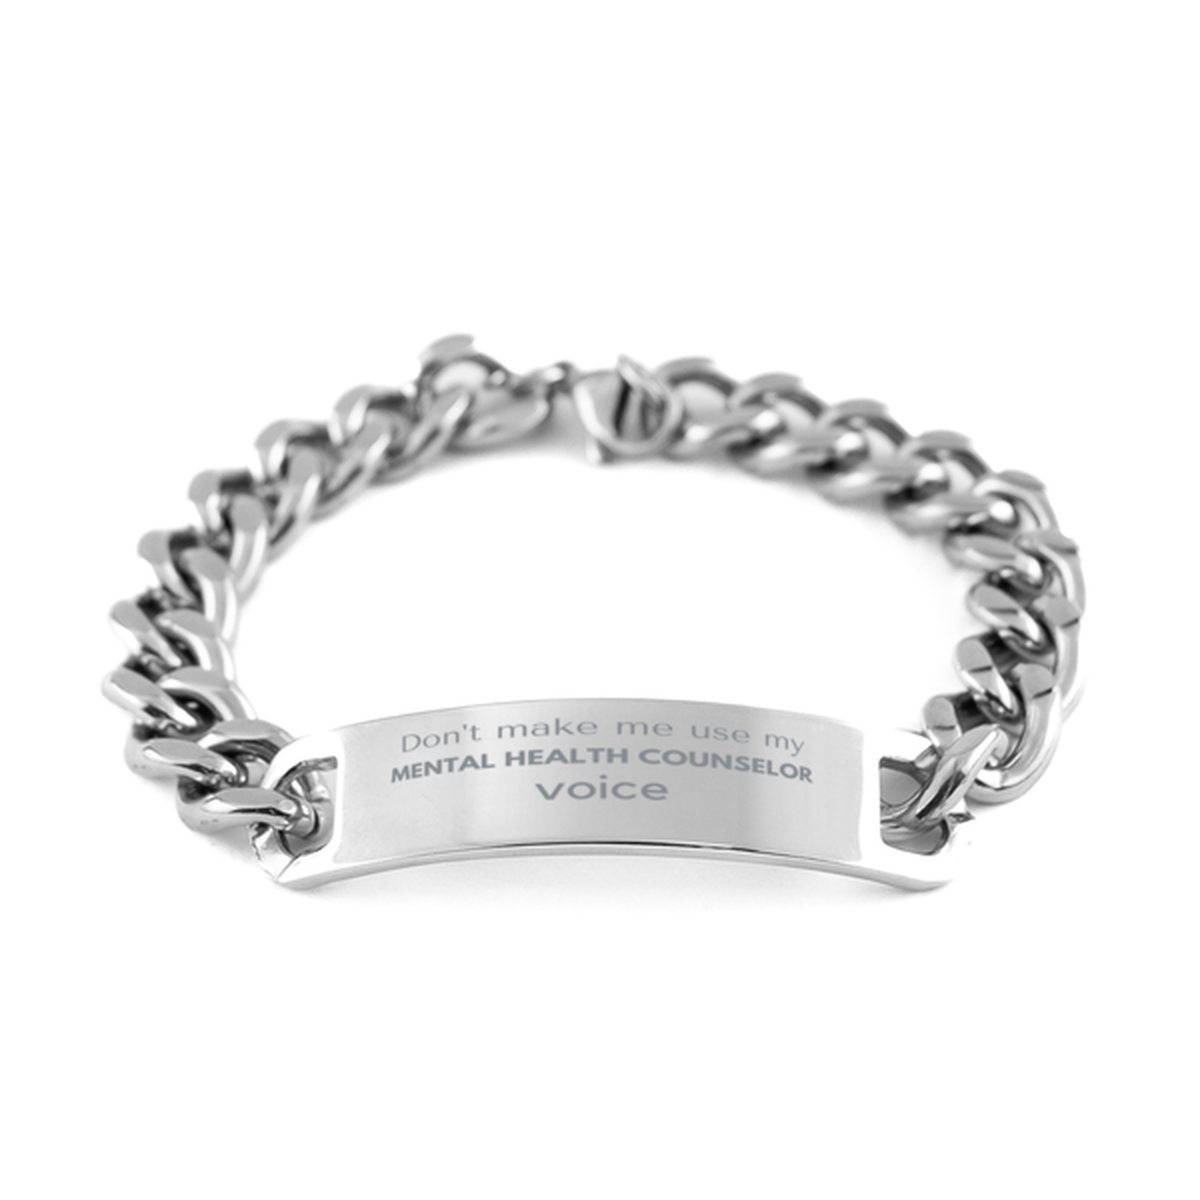 Don't make me use my Mental Health Counselor voice, Sarcasm Mental Health Counselor Gifts, Christmas Mental Health Counselor Cuban Chain Stainless Steel Bracelet Birthday Unique Gifts For Mental Health Counselor Coworkers, Men, Women, Colleague, Friends